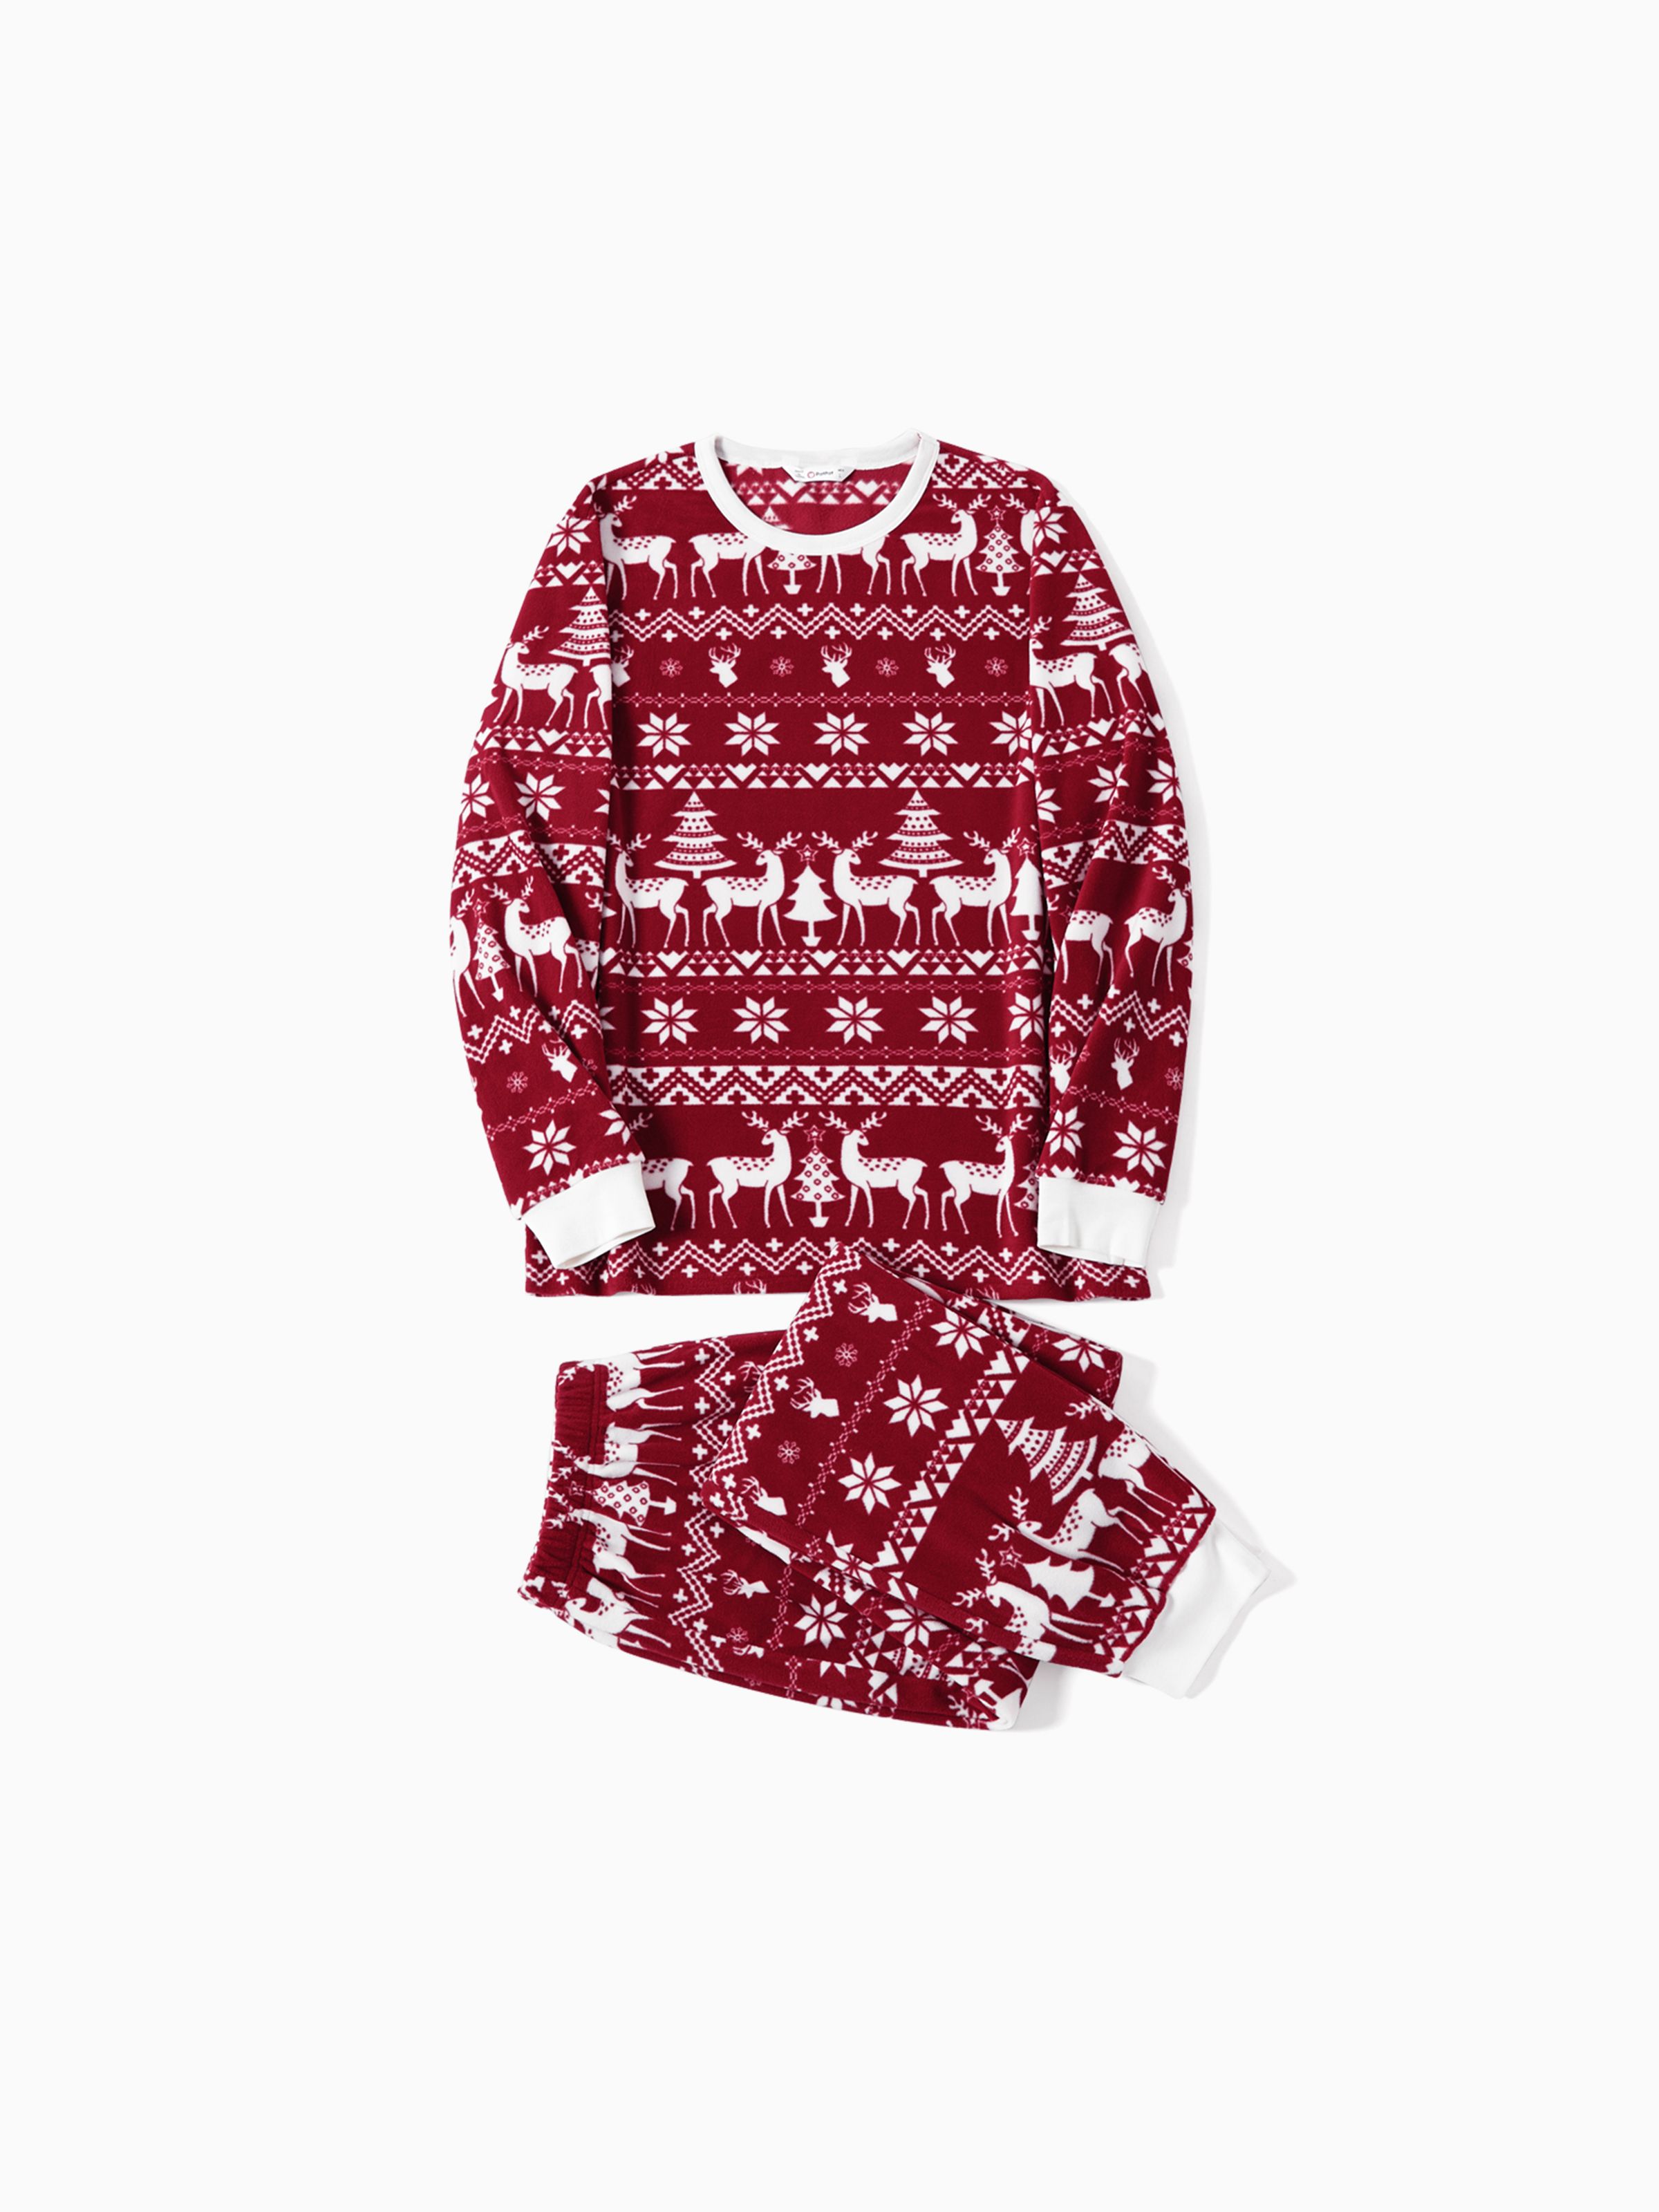 

Christmas Family Matching Festival All-over Print Long-sleeve Pajamas Sets(Flame resistant)